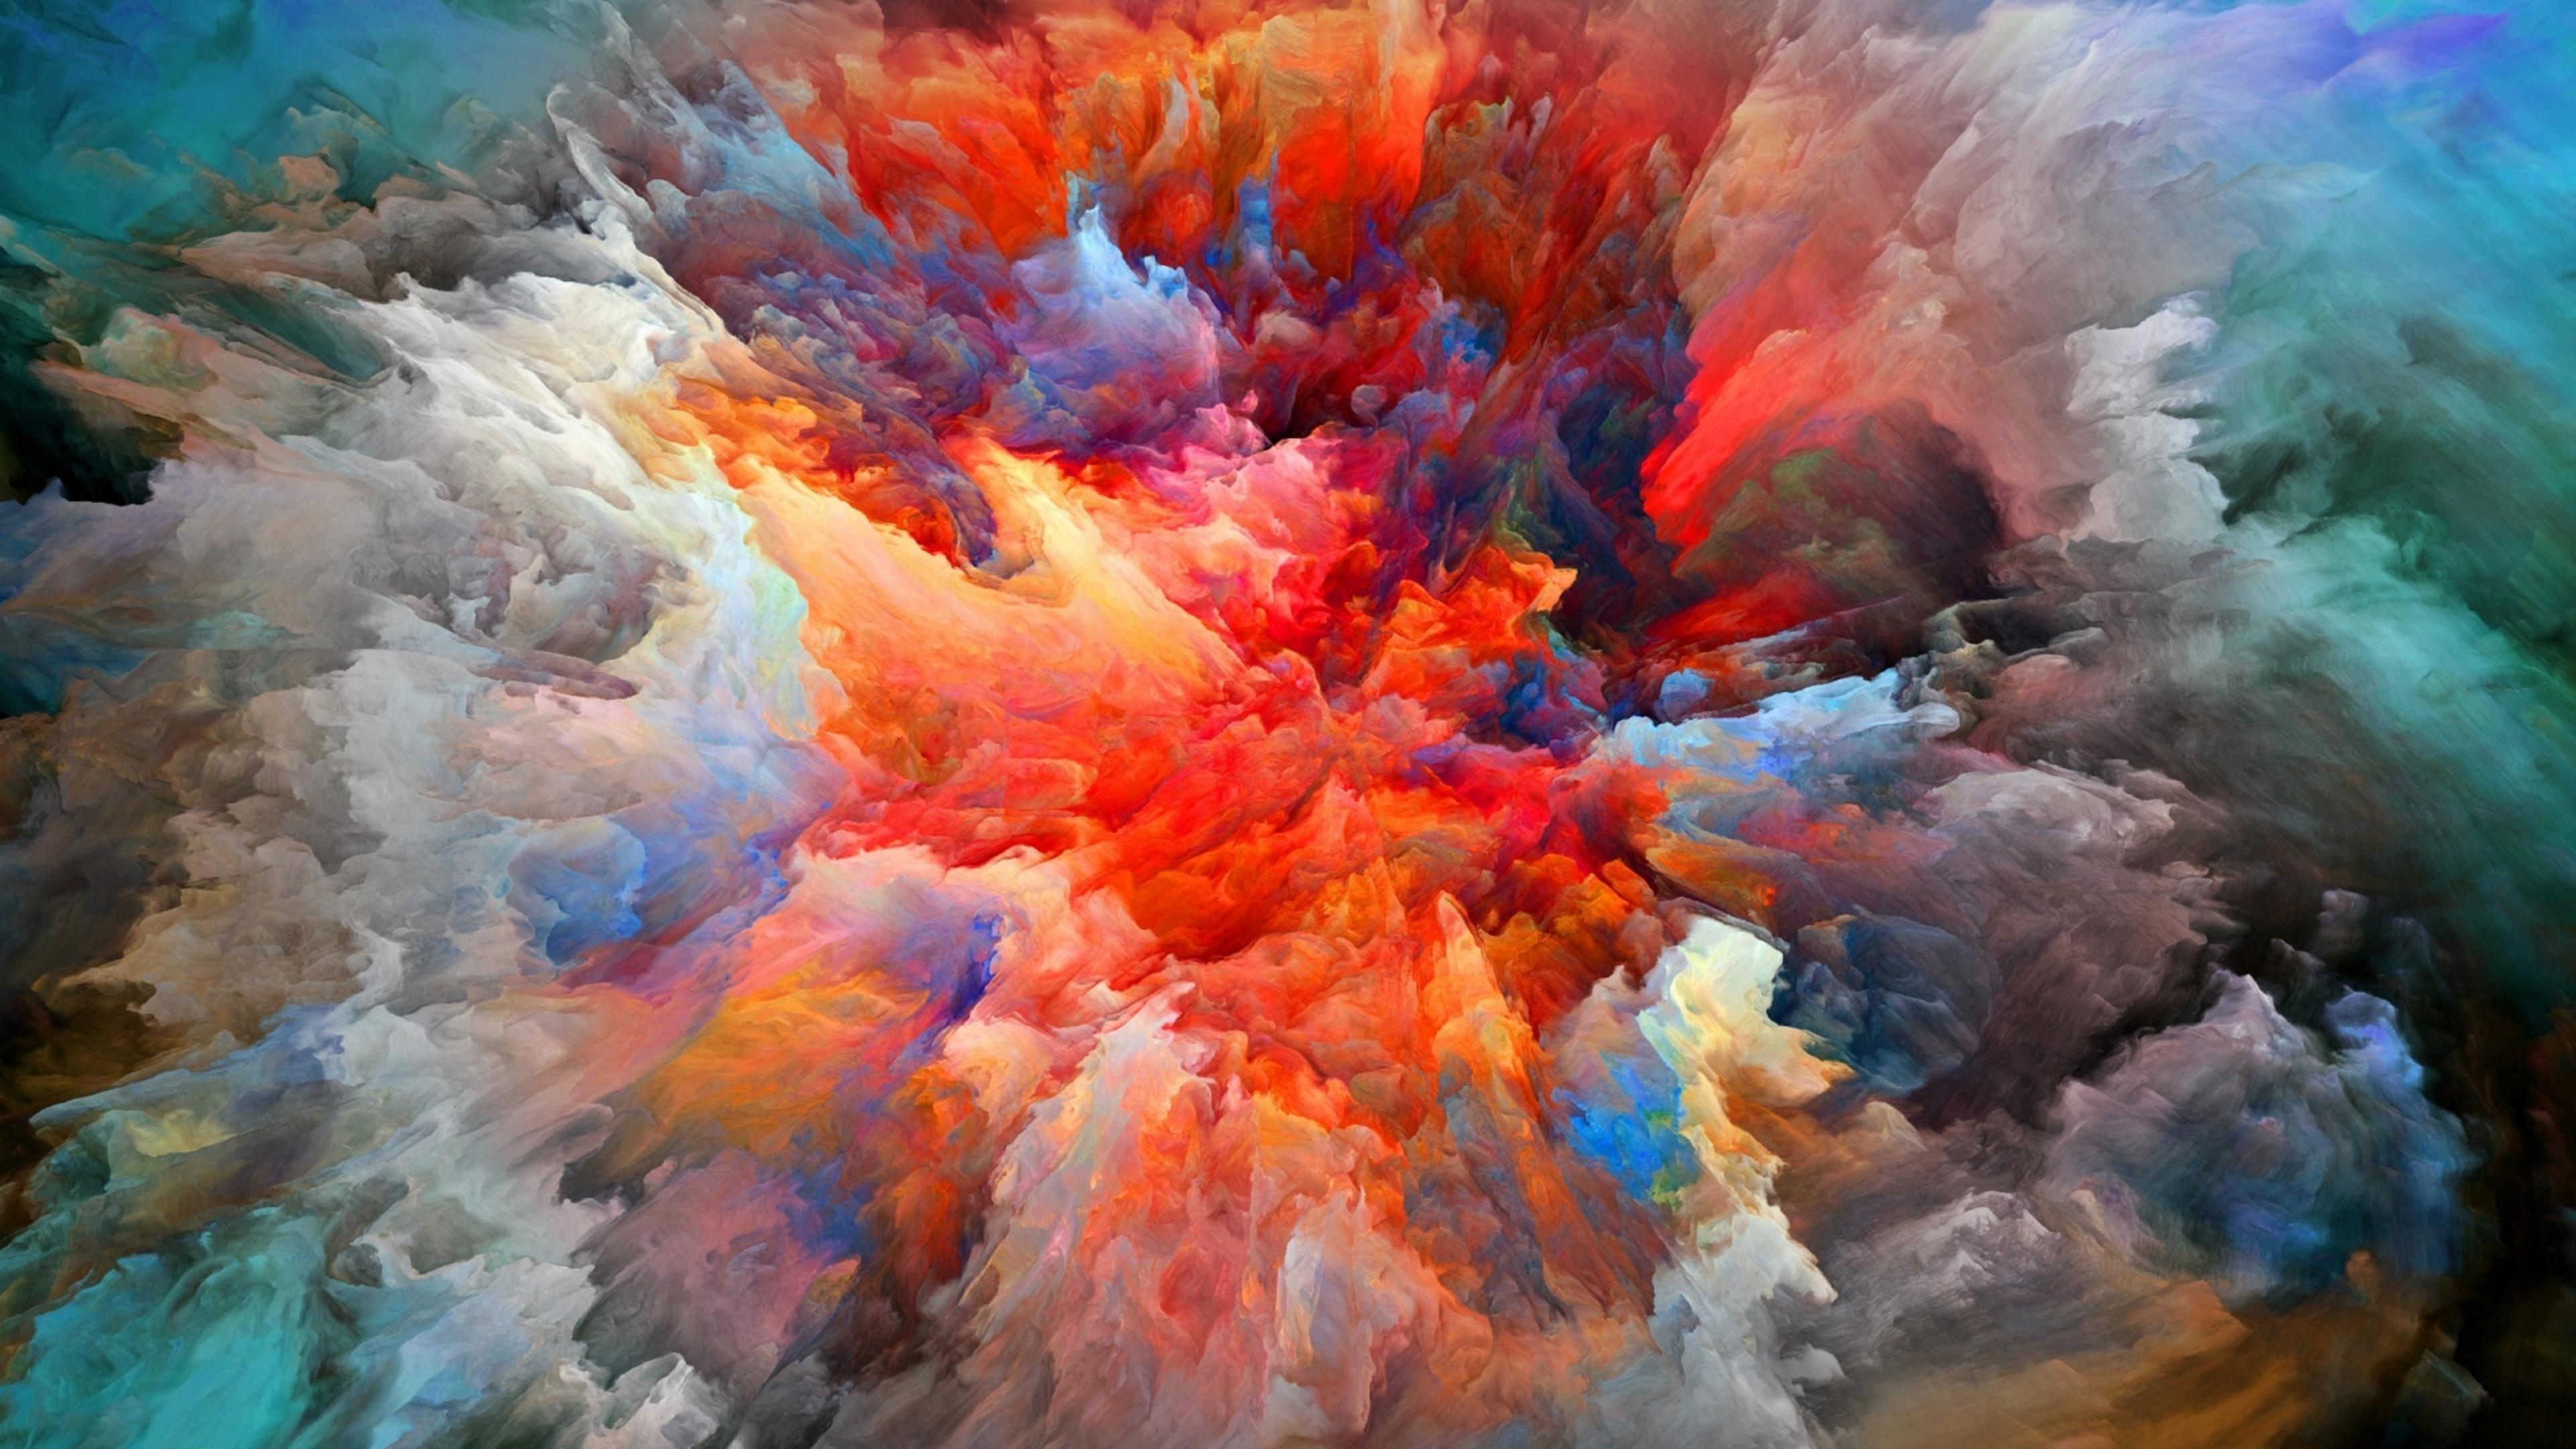 Explosion of colors